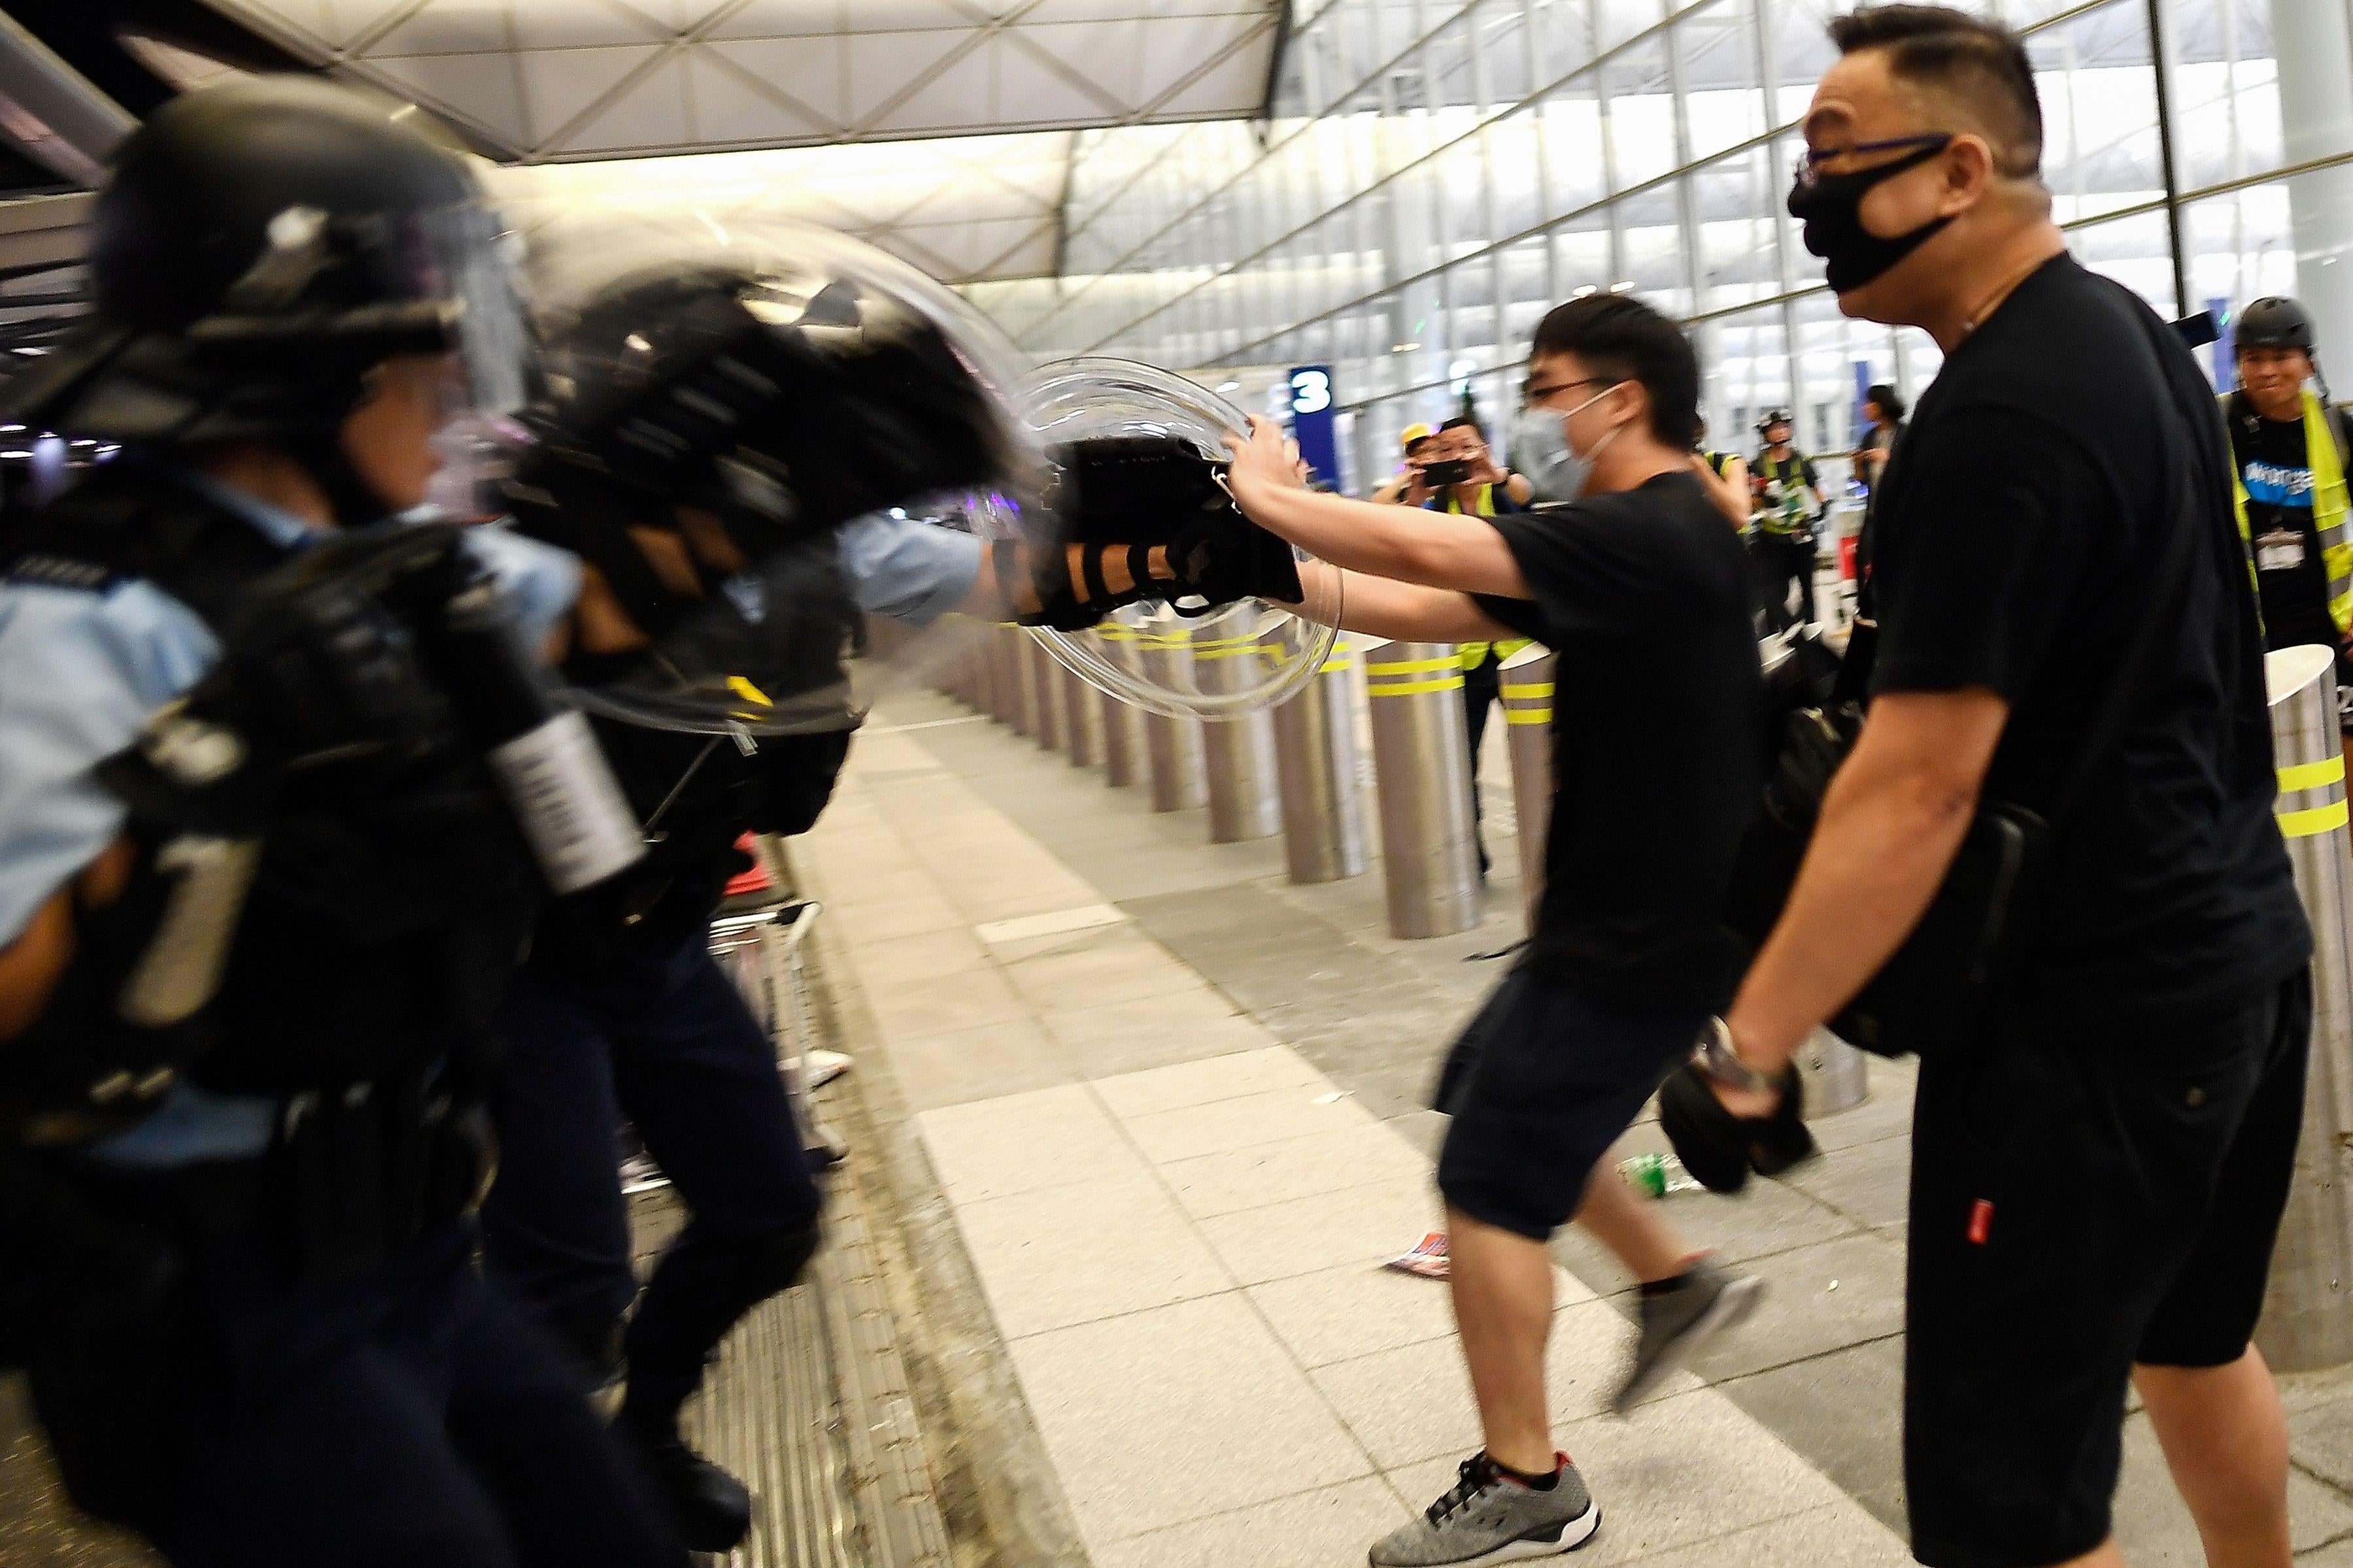 Police scuffle with pro-democracy protesters at the airport.